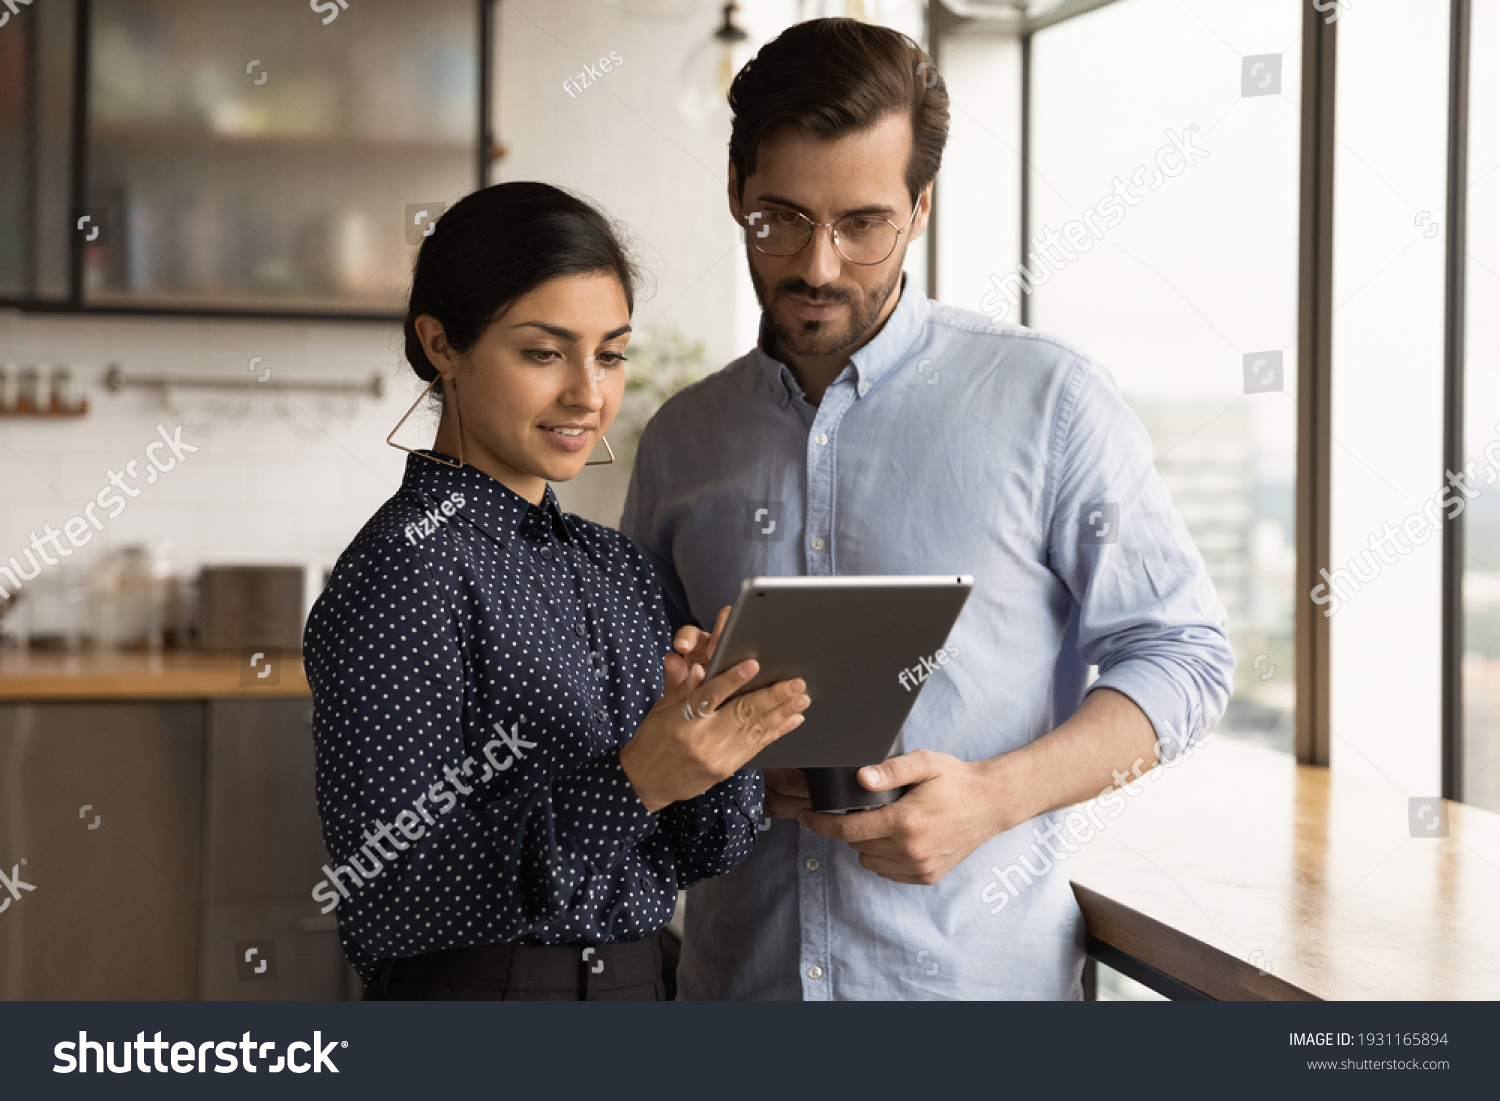 Close up diverse colleagues using tablet together, discussing online project, smiling Indian businesswoman and Caucasian businessman wearing glasses looking at device screen, standing in office #1931165894